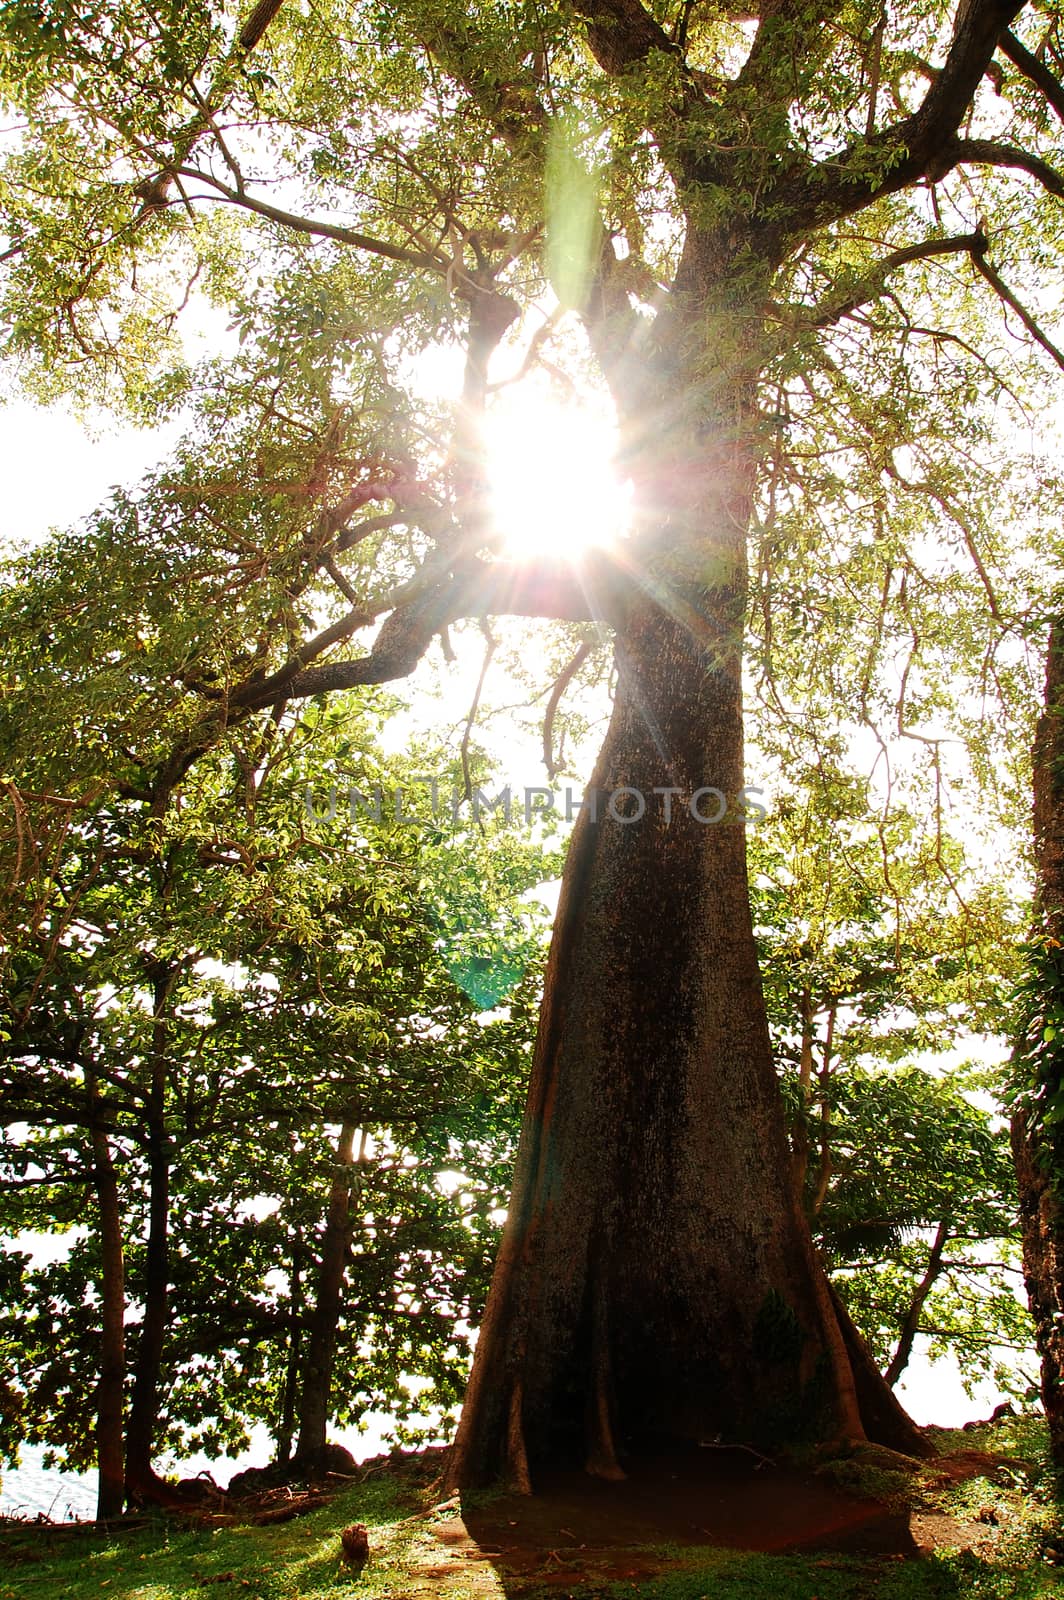 Tall tree with green leaves during daytime in the province of Camiguin, Philippines